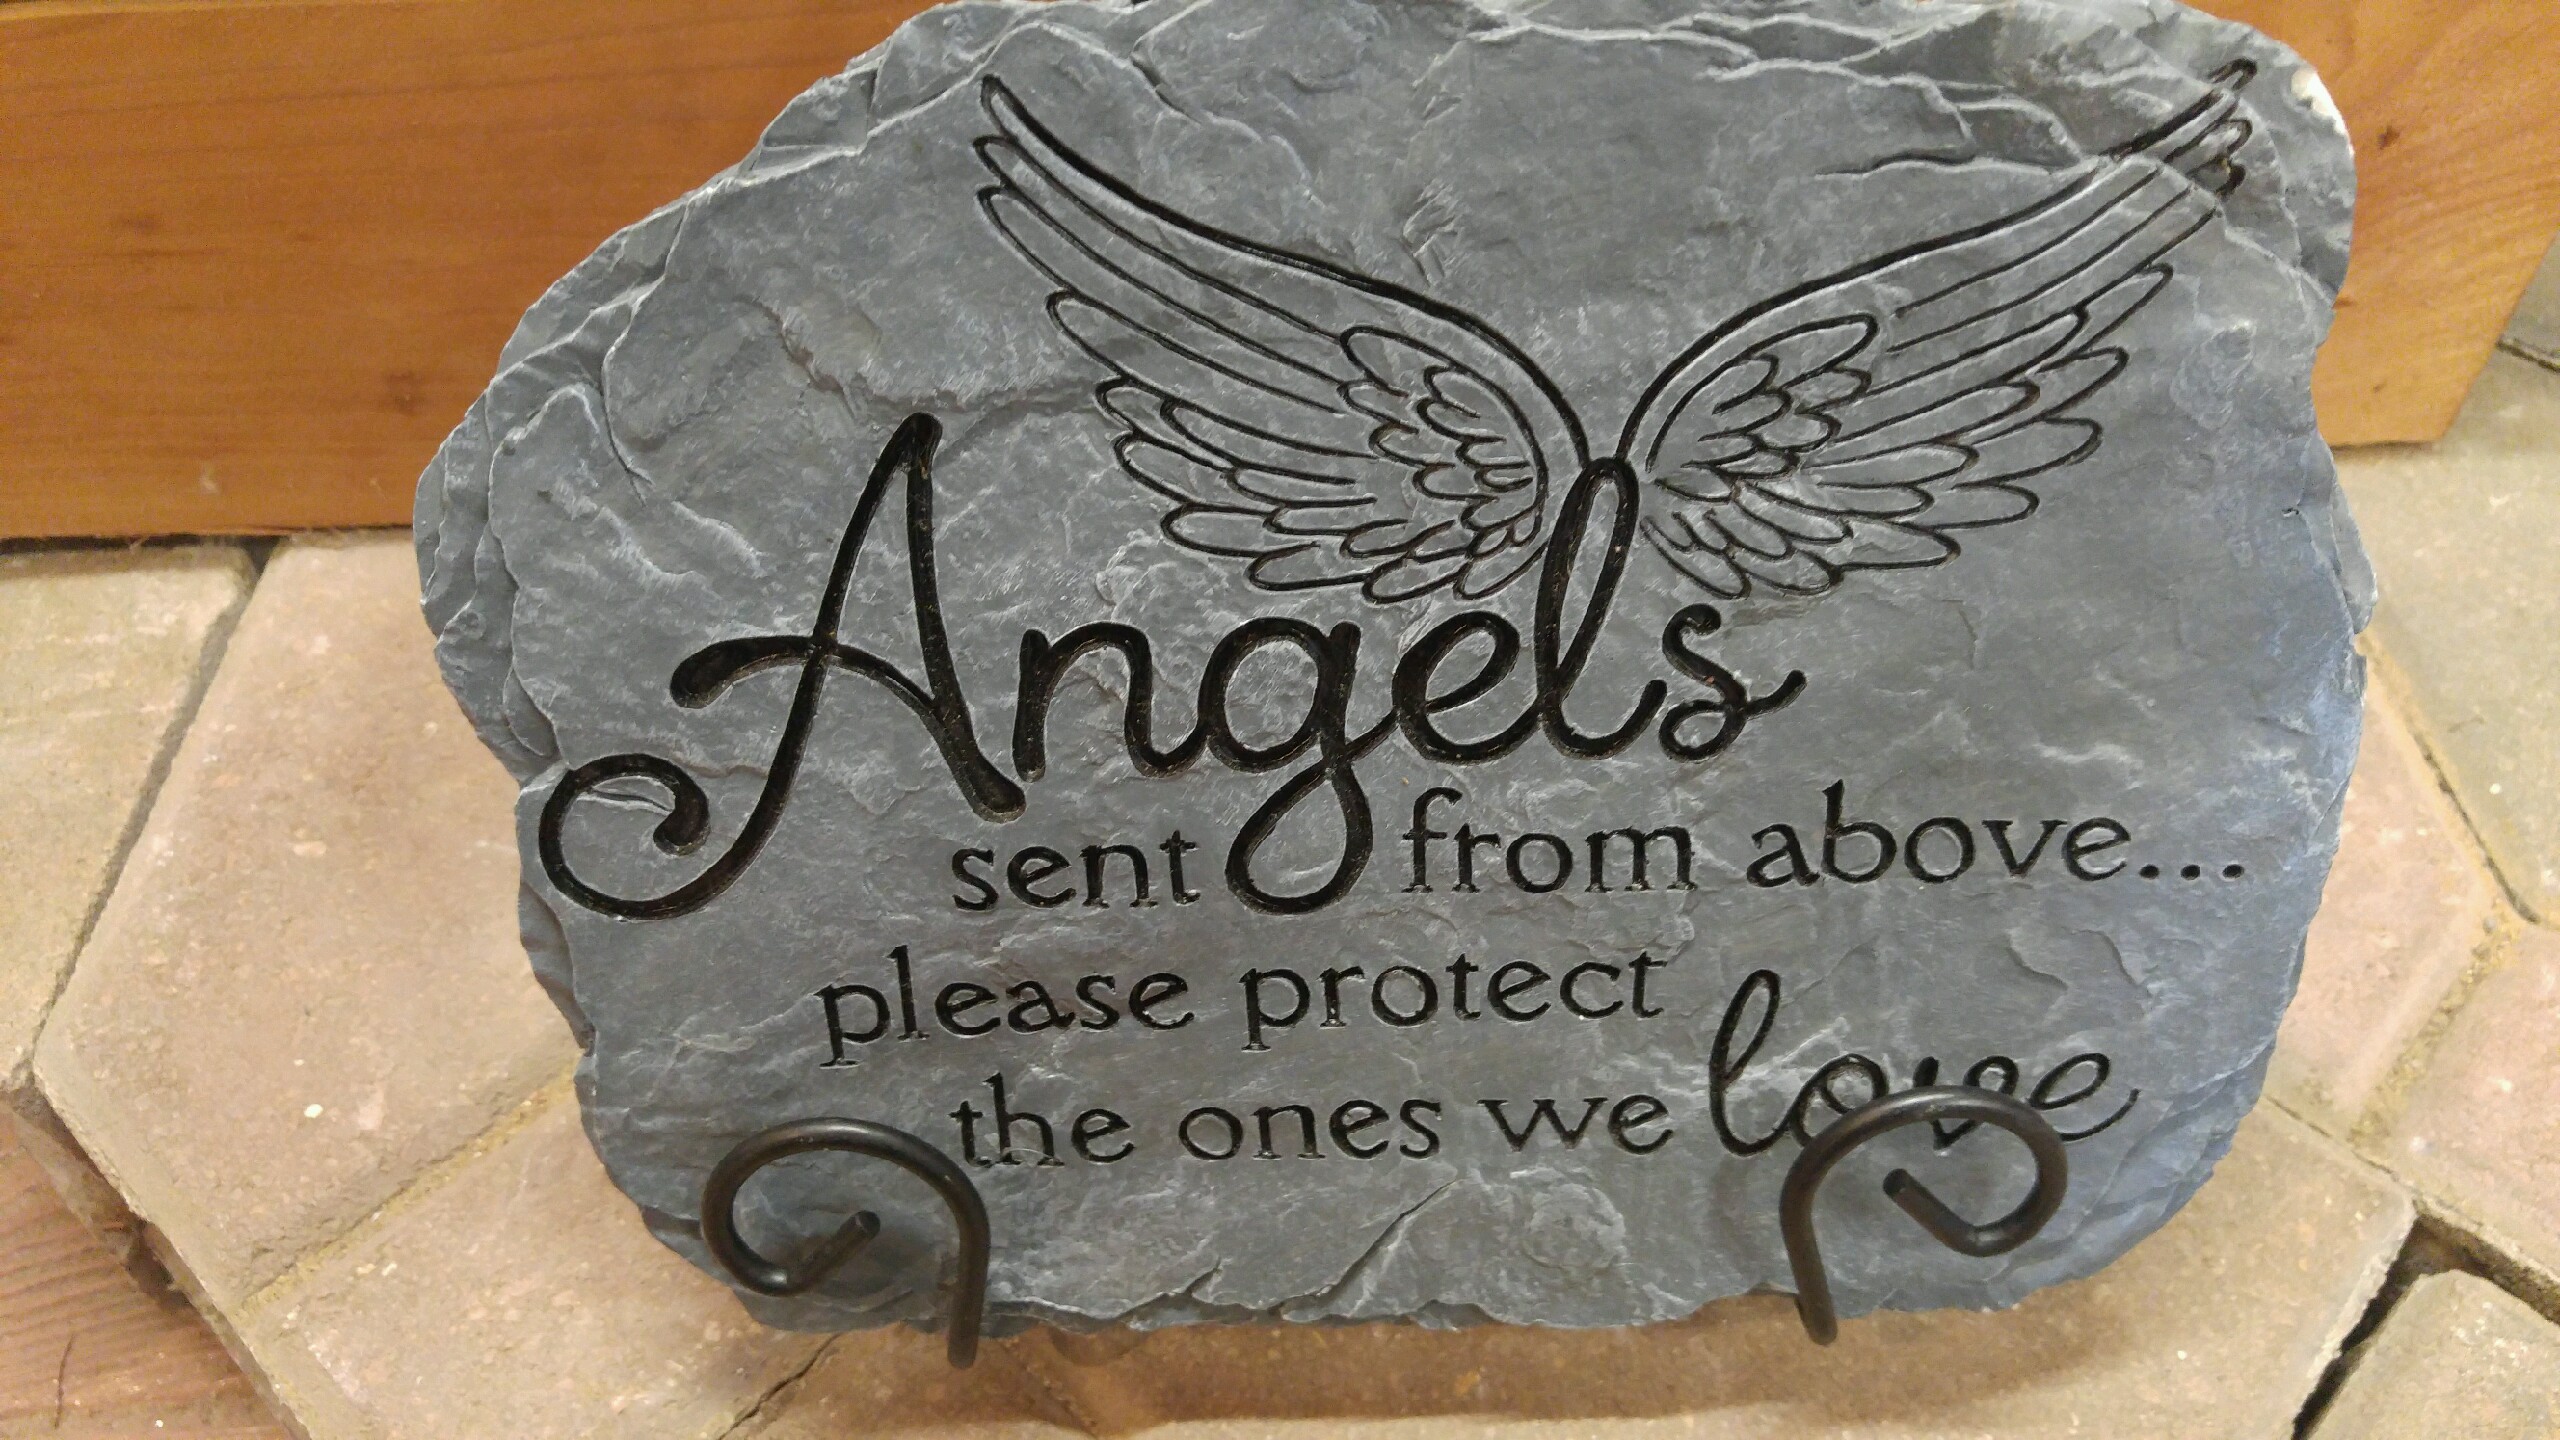 ‘Angels Sent From Above’ Engraved Stone